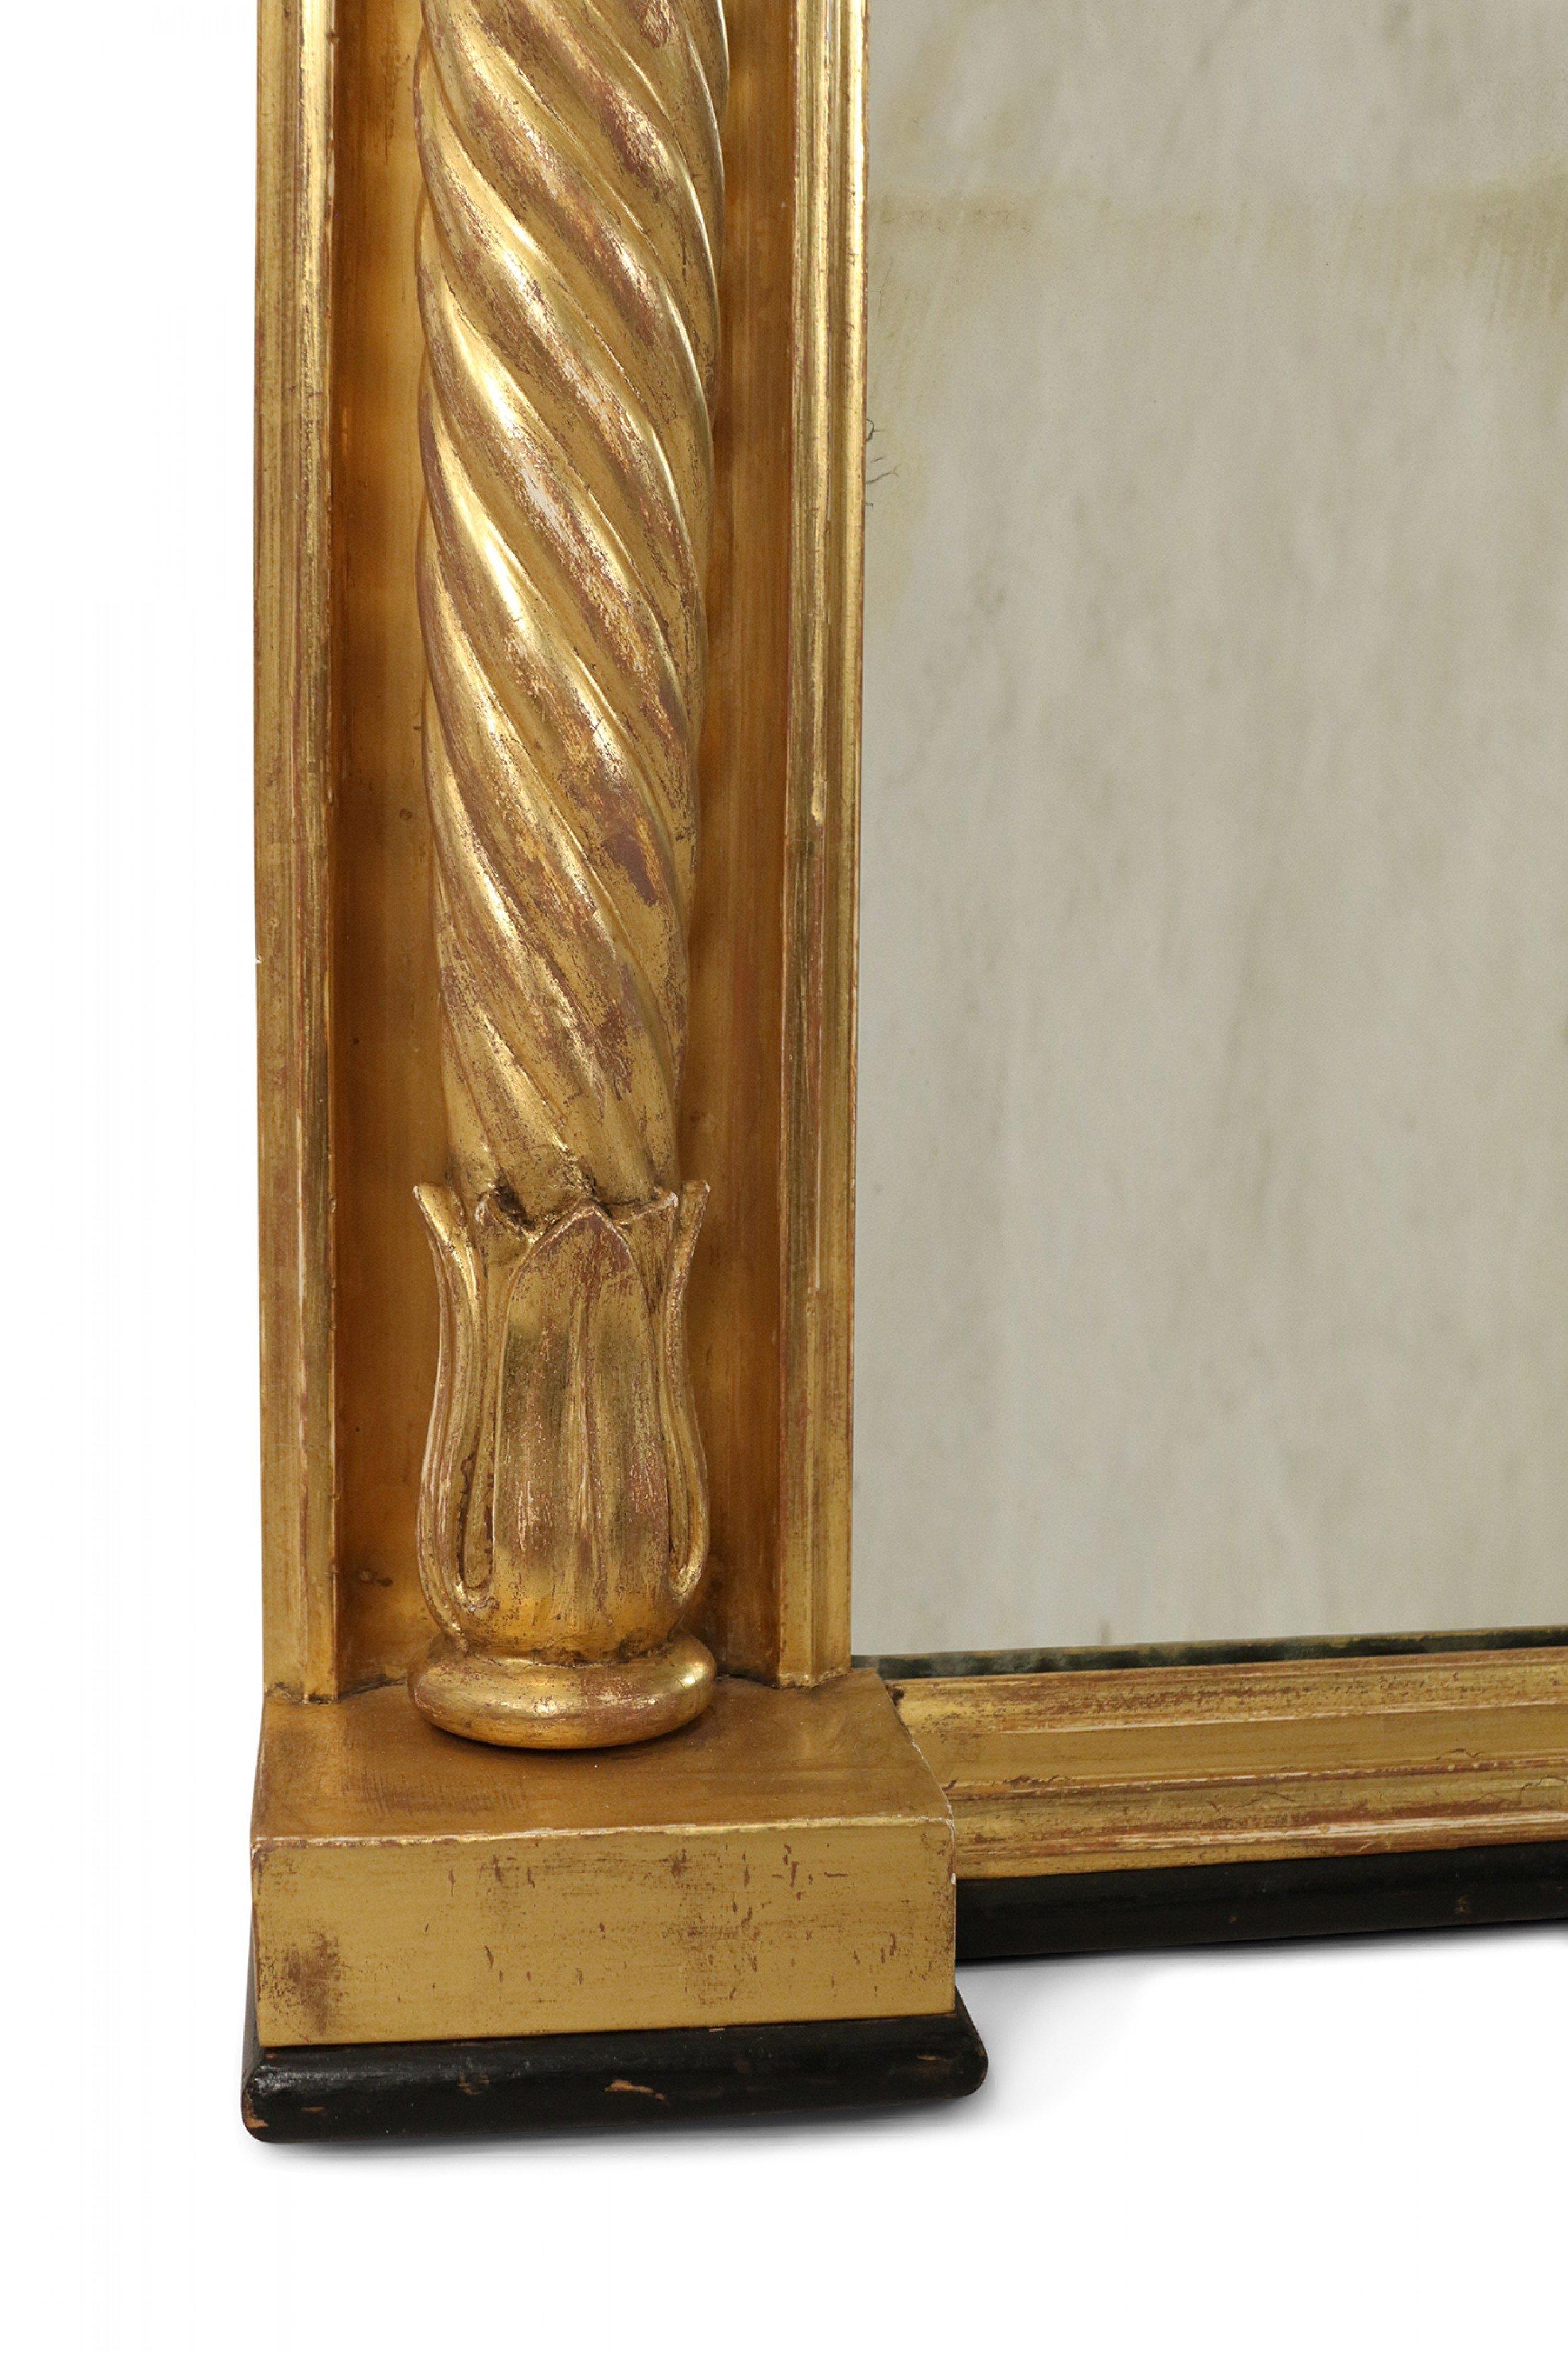 English William IV large carved giltwood horizontal (over-mantel (fireplace)) wall mirror with swirl carved column border.